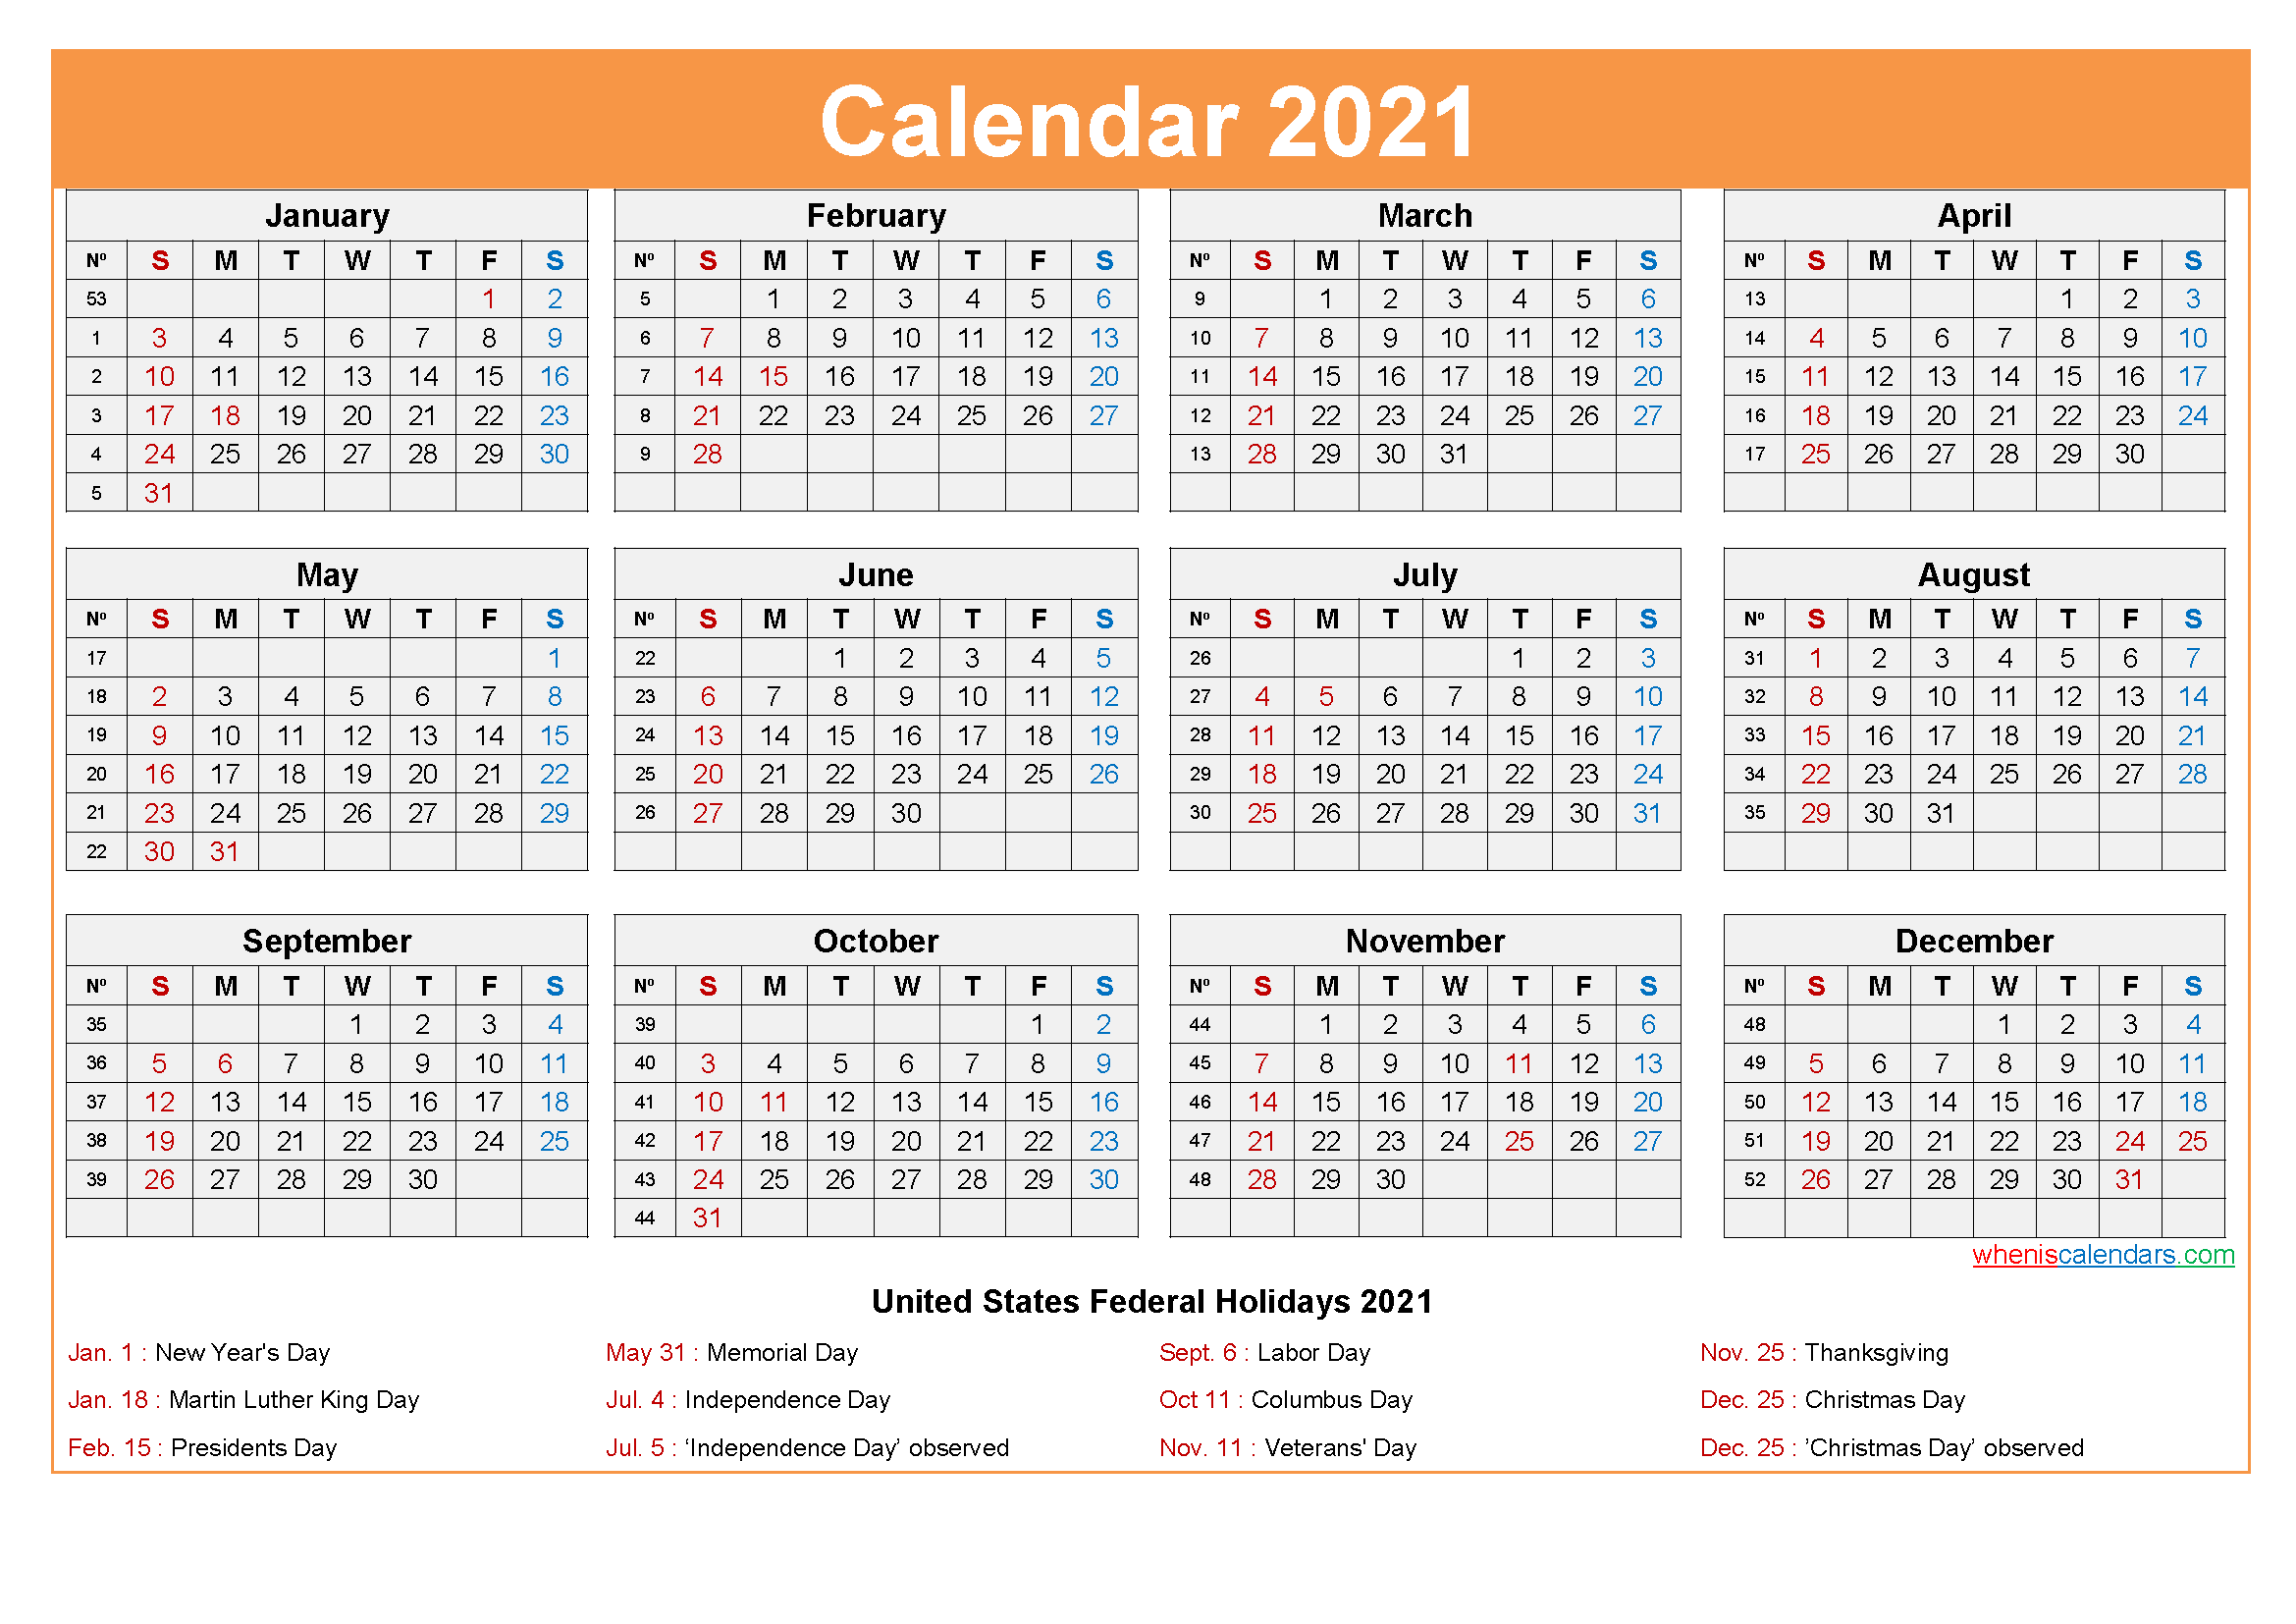 Download Free Printable 2021 Calendar with Holidays as Word, PDF